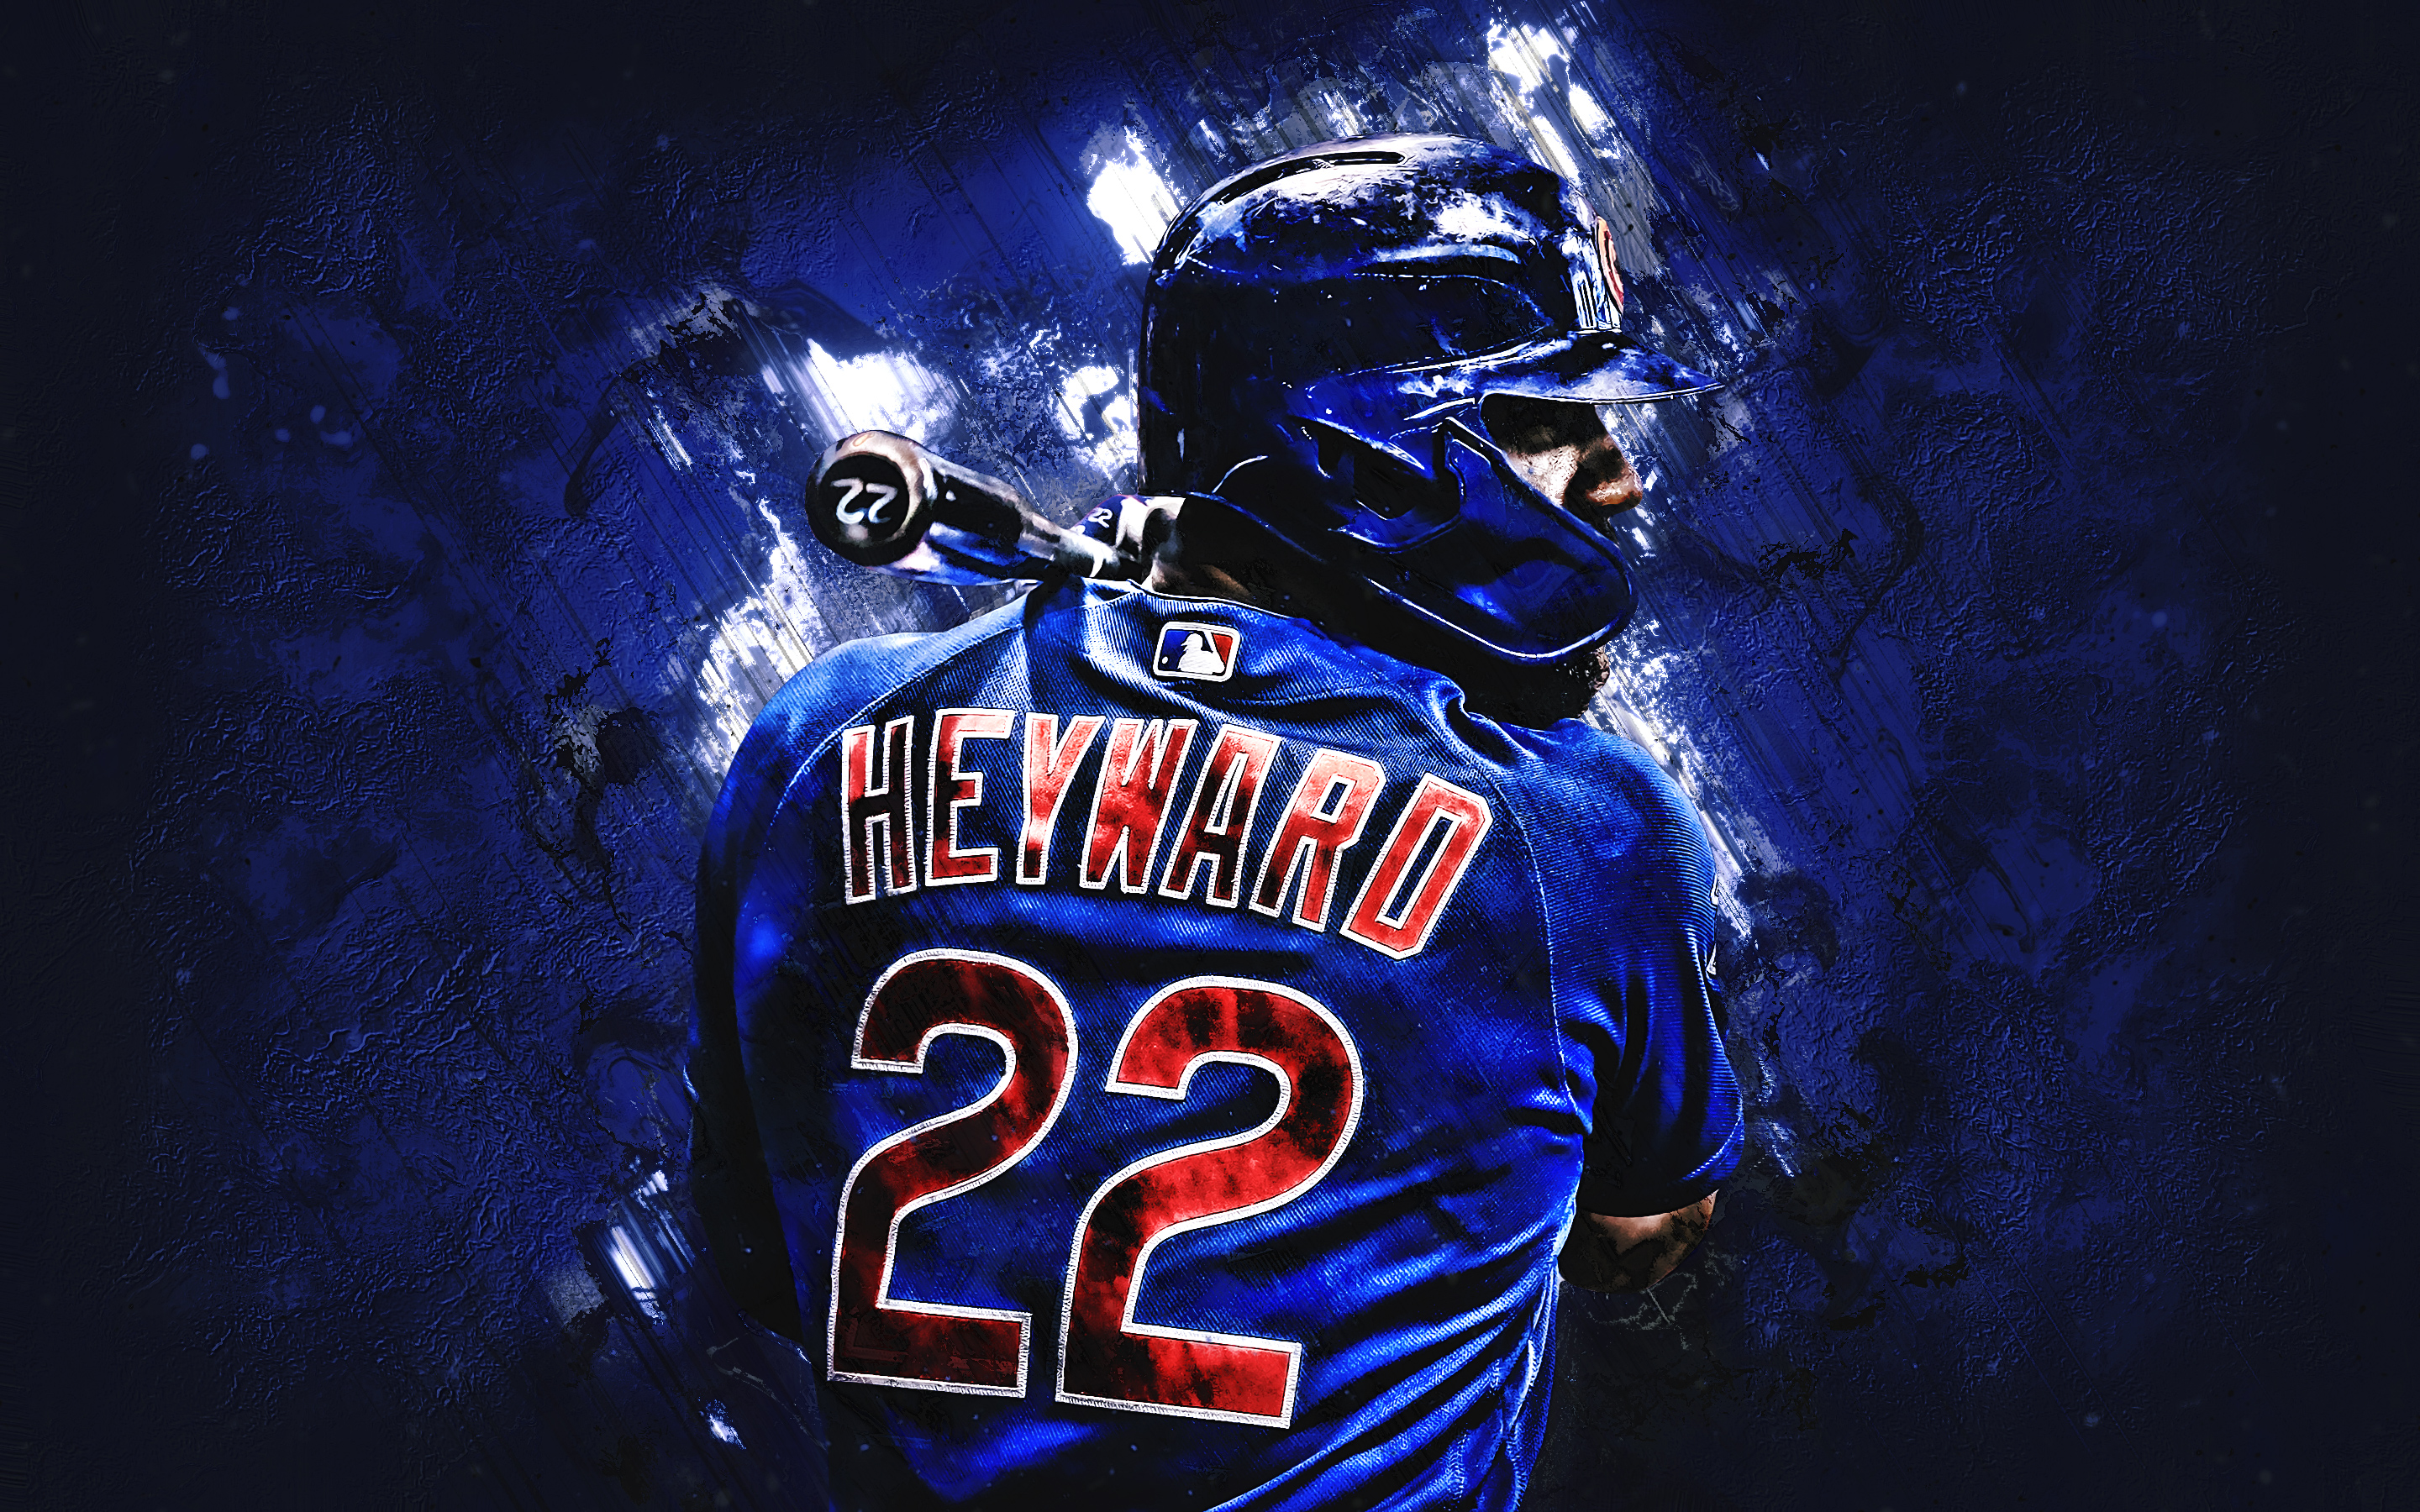 Download wallpaper Jason Heyward, Chicago Cubs, MLB, American baseball player, portrait, blue stone background, baseball, Major League Baseball for desktop with resolution 2880x1800. High Quality HD picture wallpaper